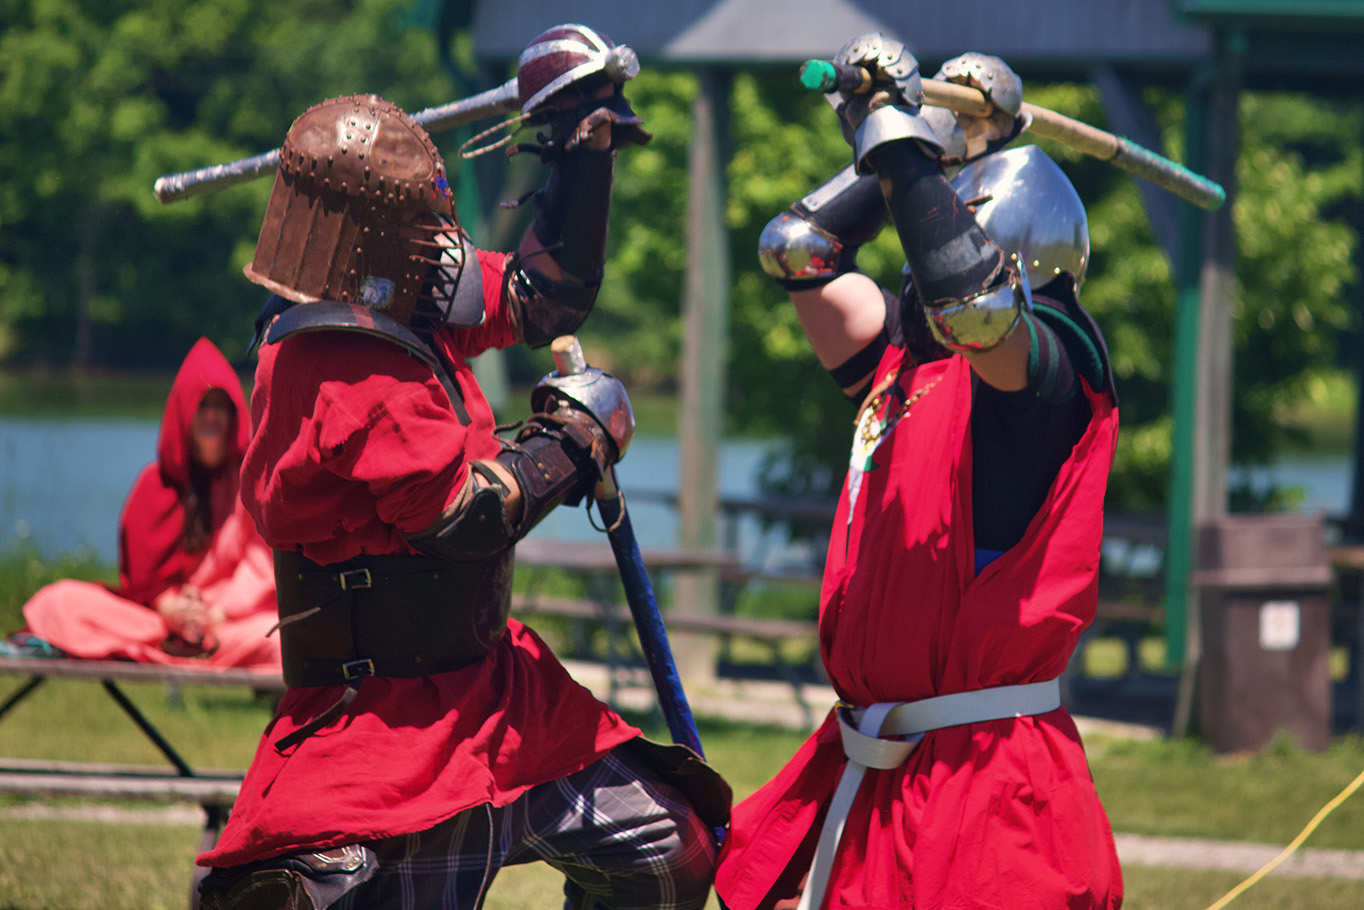 Jack The Pirate and Sir Maneke throw powerful shots against each other simultaneously in a melee battle